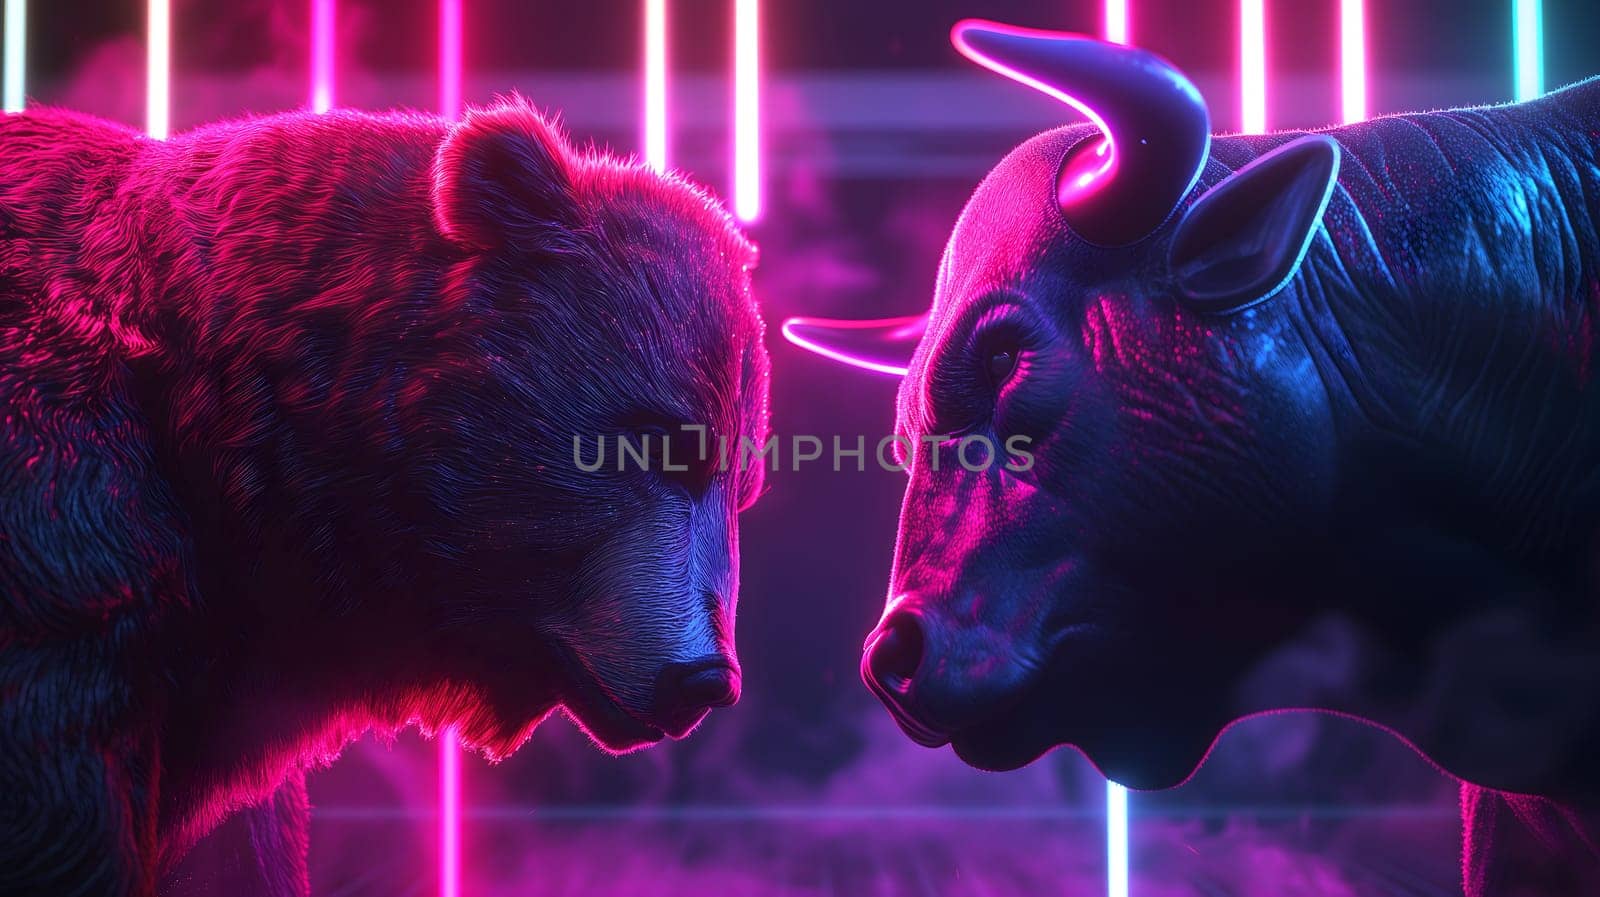 Bear and bull going head to head with pink and cyan neon lighting. Neural network generated image. Not based on any actual person or scene.